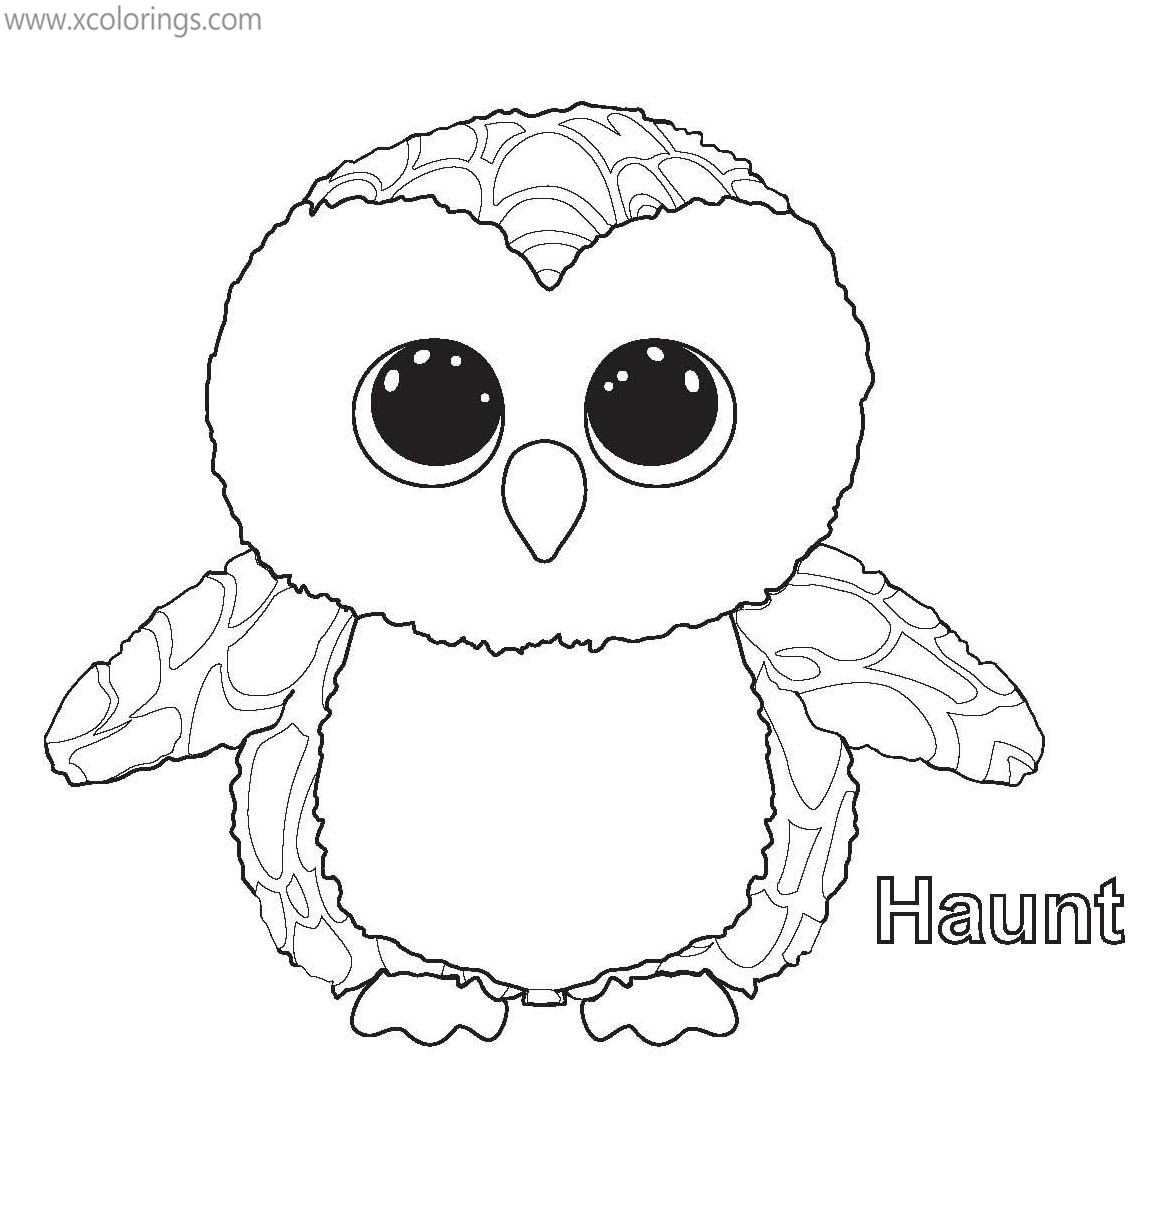 Free Beanie Boos Coloring Pages Haunt printable